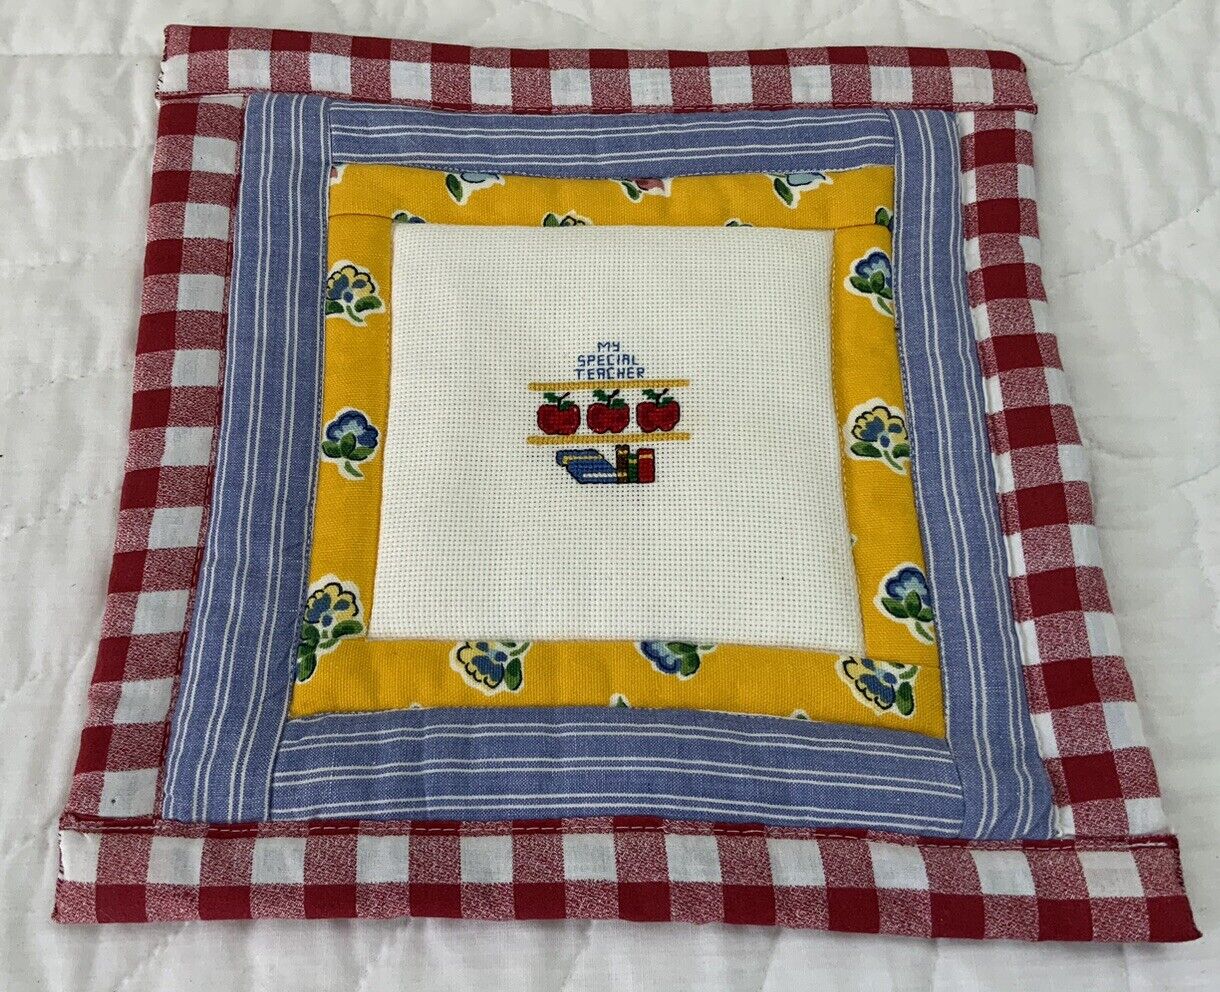 Hand Made Patchwork Quilt Table Topper Or Wall Hanging, Needlepoint, My Teacher